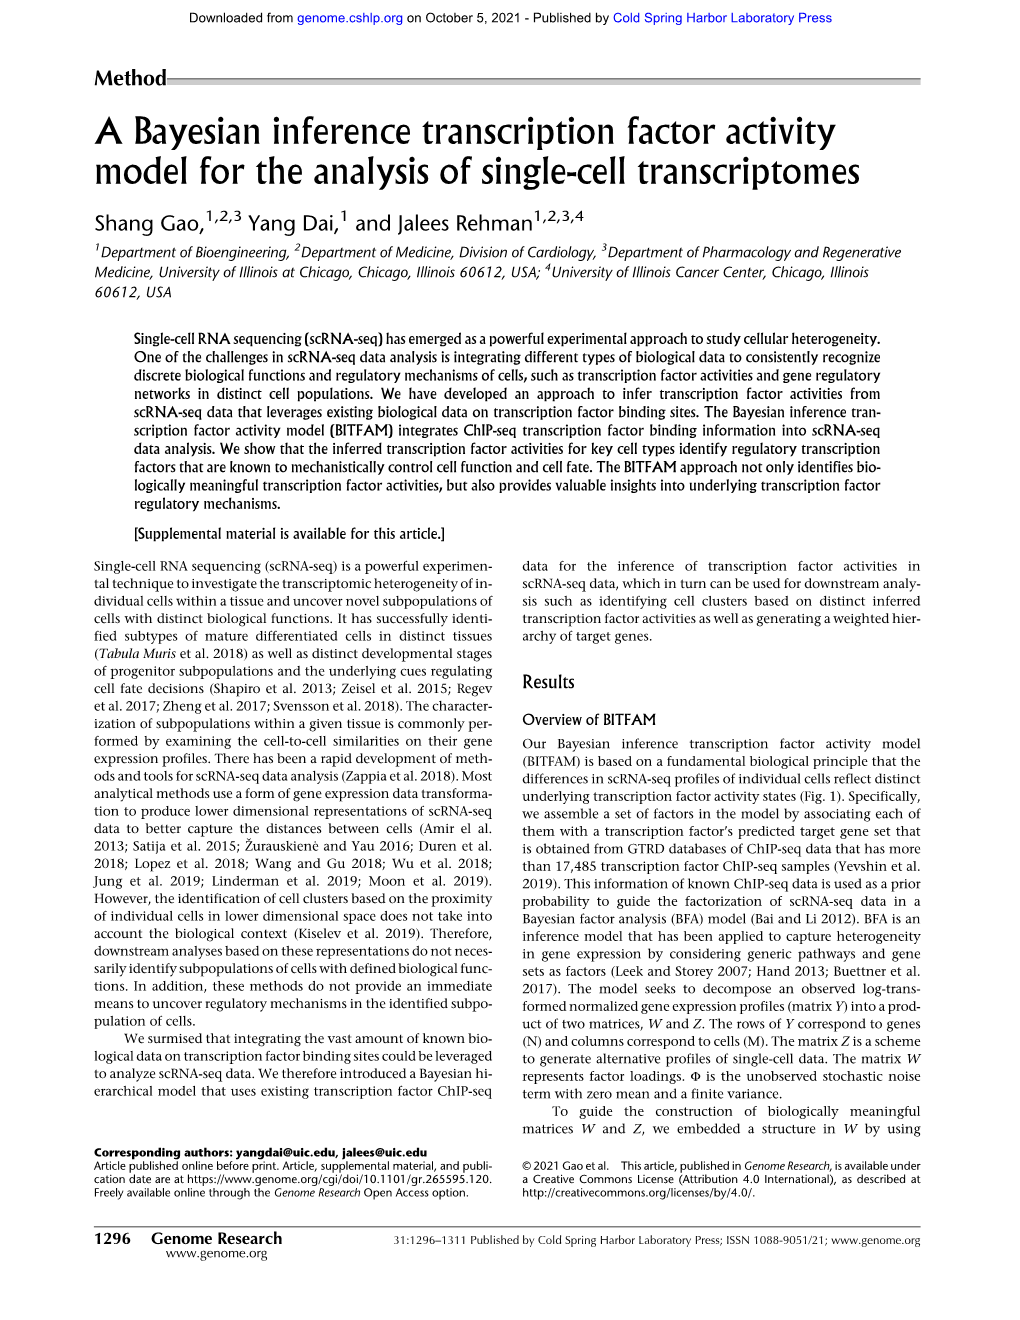 A Bayesian Inference Transcription Factor Activity Model for the Analysis of Single-Cell Transcriptomes